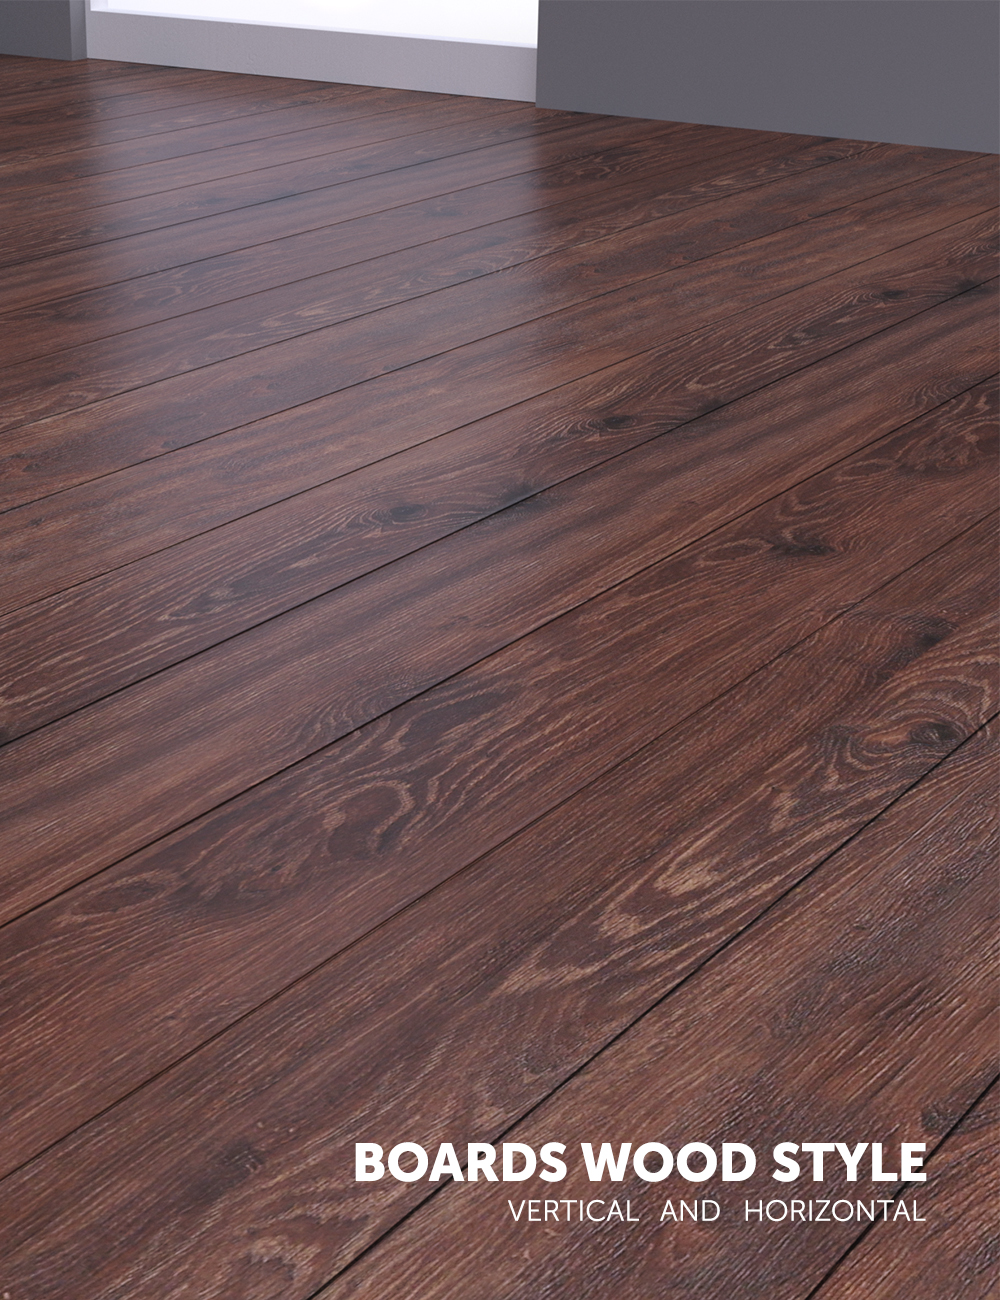 Wooden Floor - Iray Shaders by: Dimidrol, 3D Models by Daz 3D